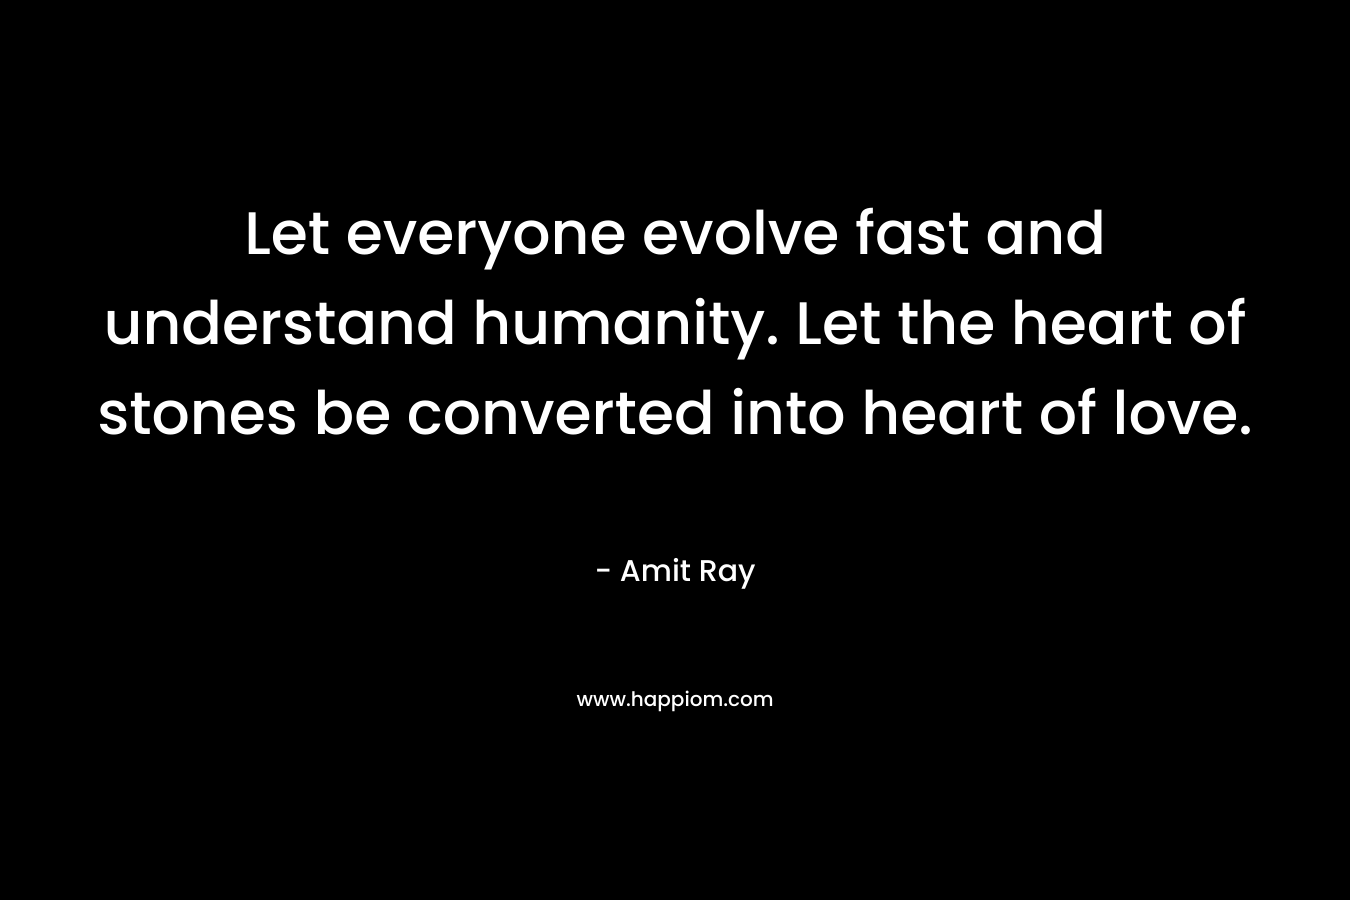 Let everyone evolve fast and understand humanity. Let the heart of stones be converted into heart of love. – Amit Ray